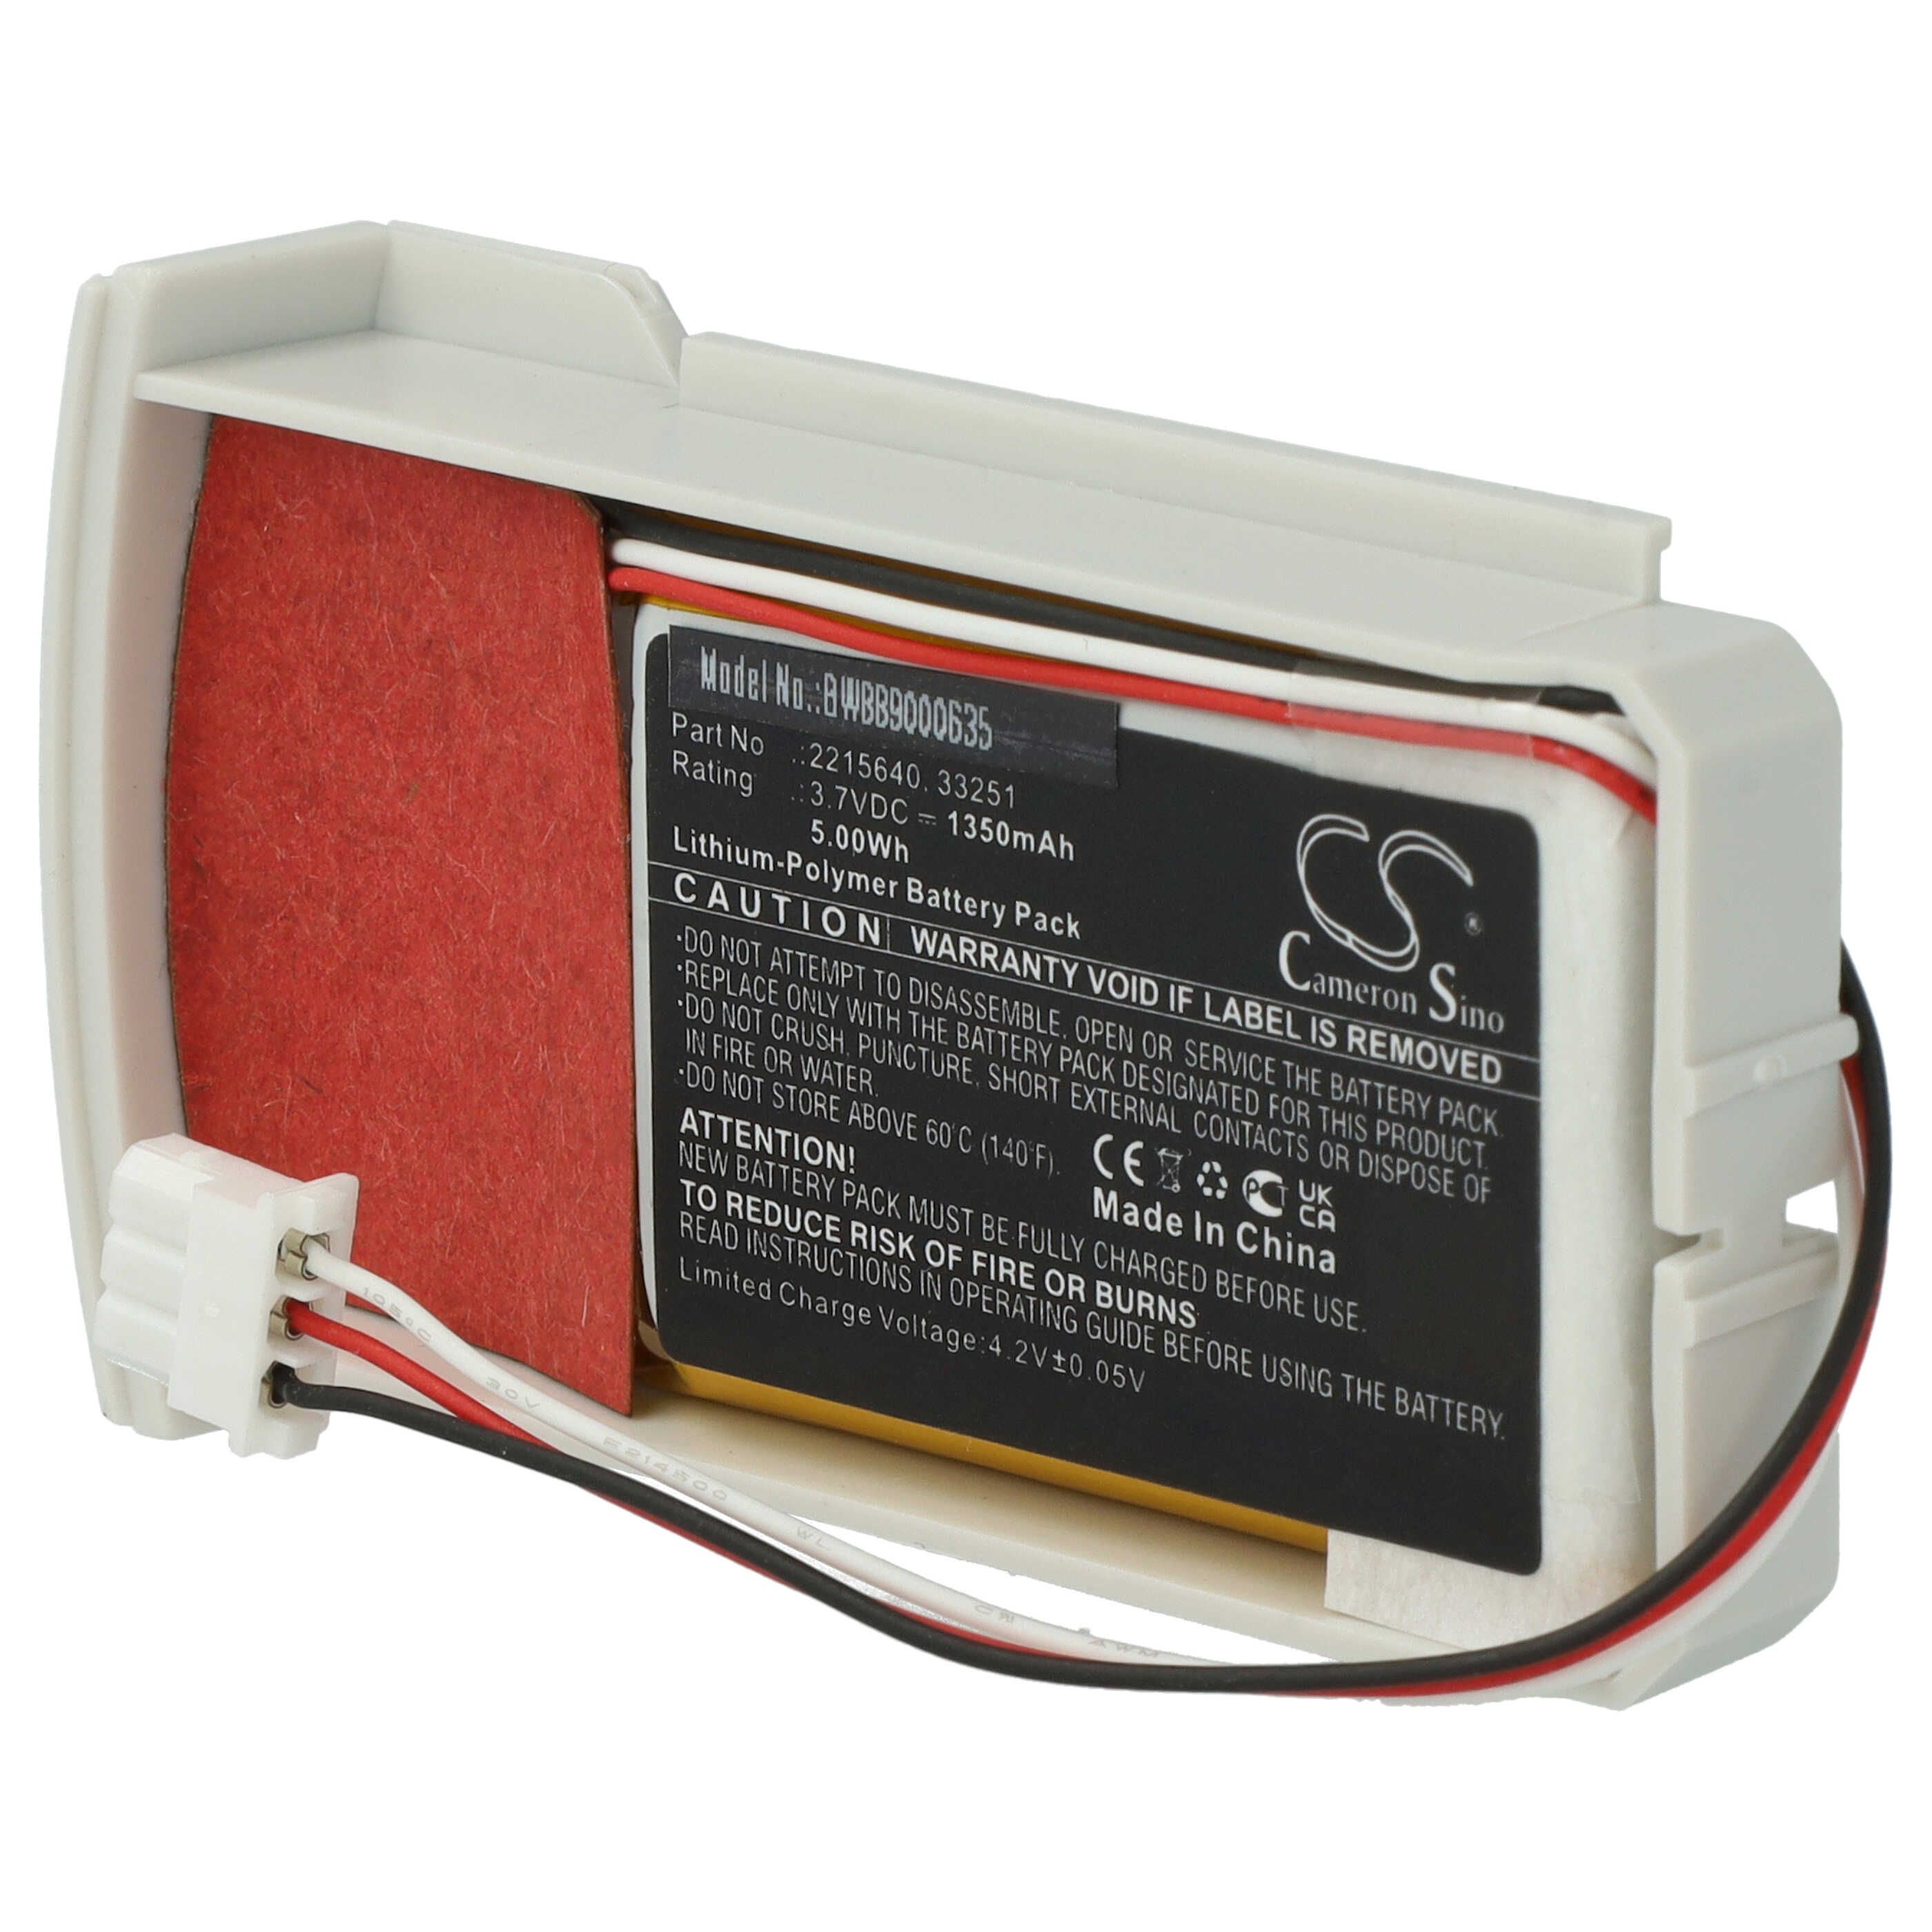 Medical Equipment Battery Replacement for Thermo Scientific 33251, 2215640 - 1350mAh 3.7V Li-polymer